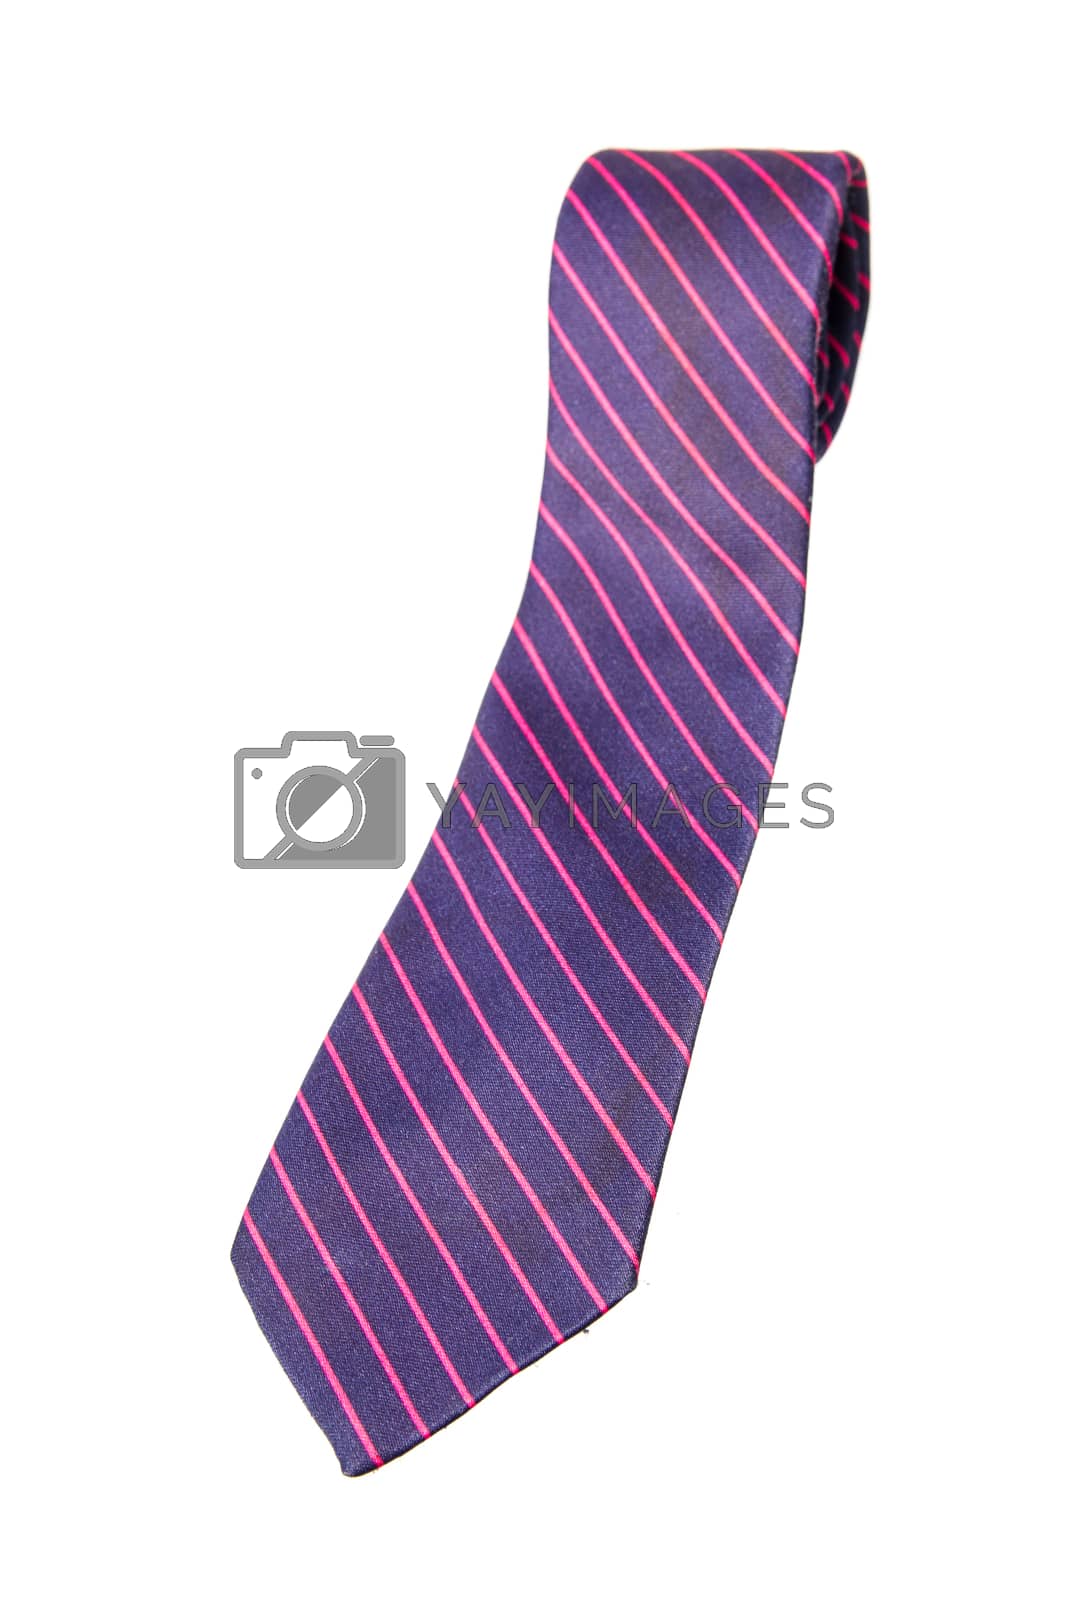 Royalty free image of blue and pink strips business neck tie by kasinv